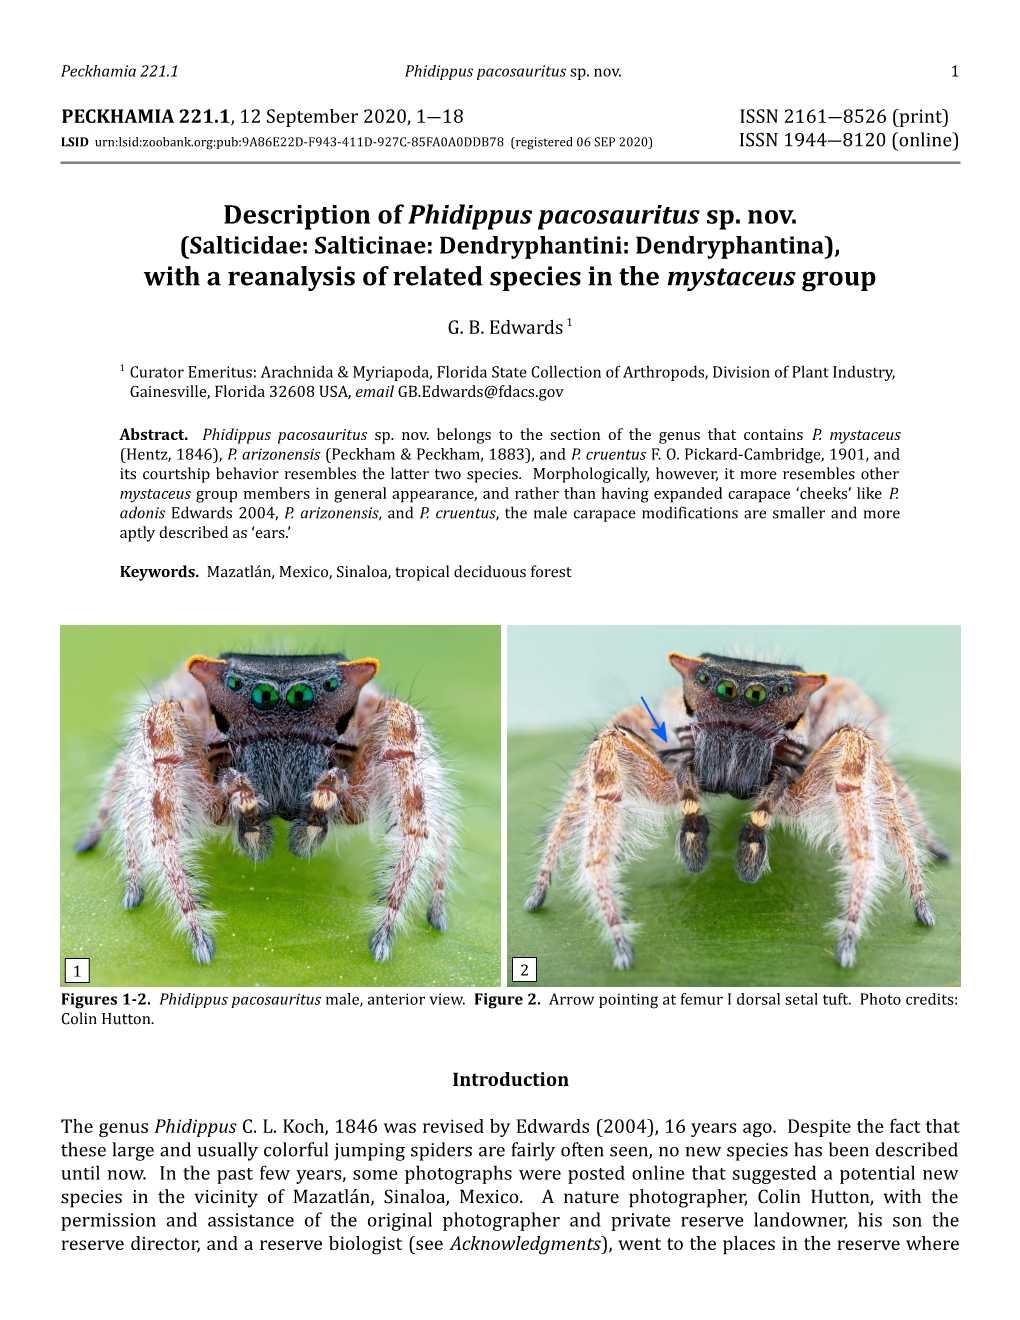 Description of Phidippus Pacosauritus Sp. Nov. with a Reanalysis of Related